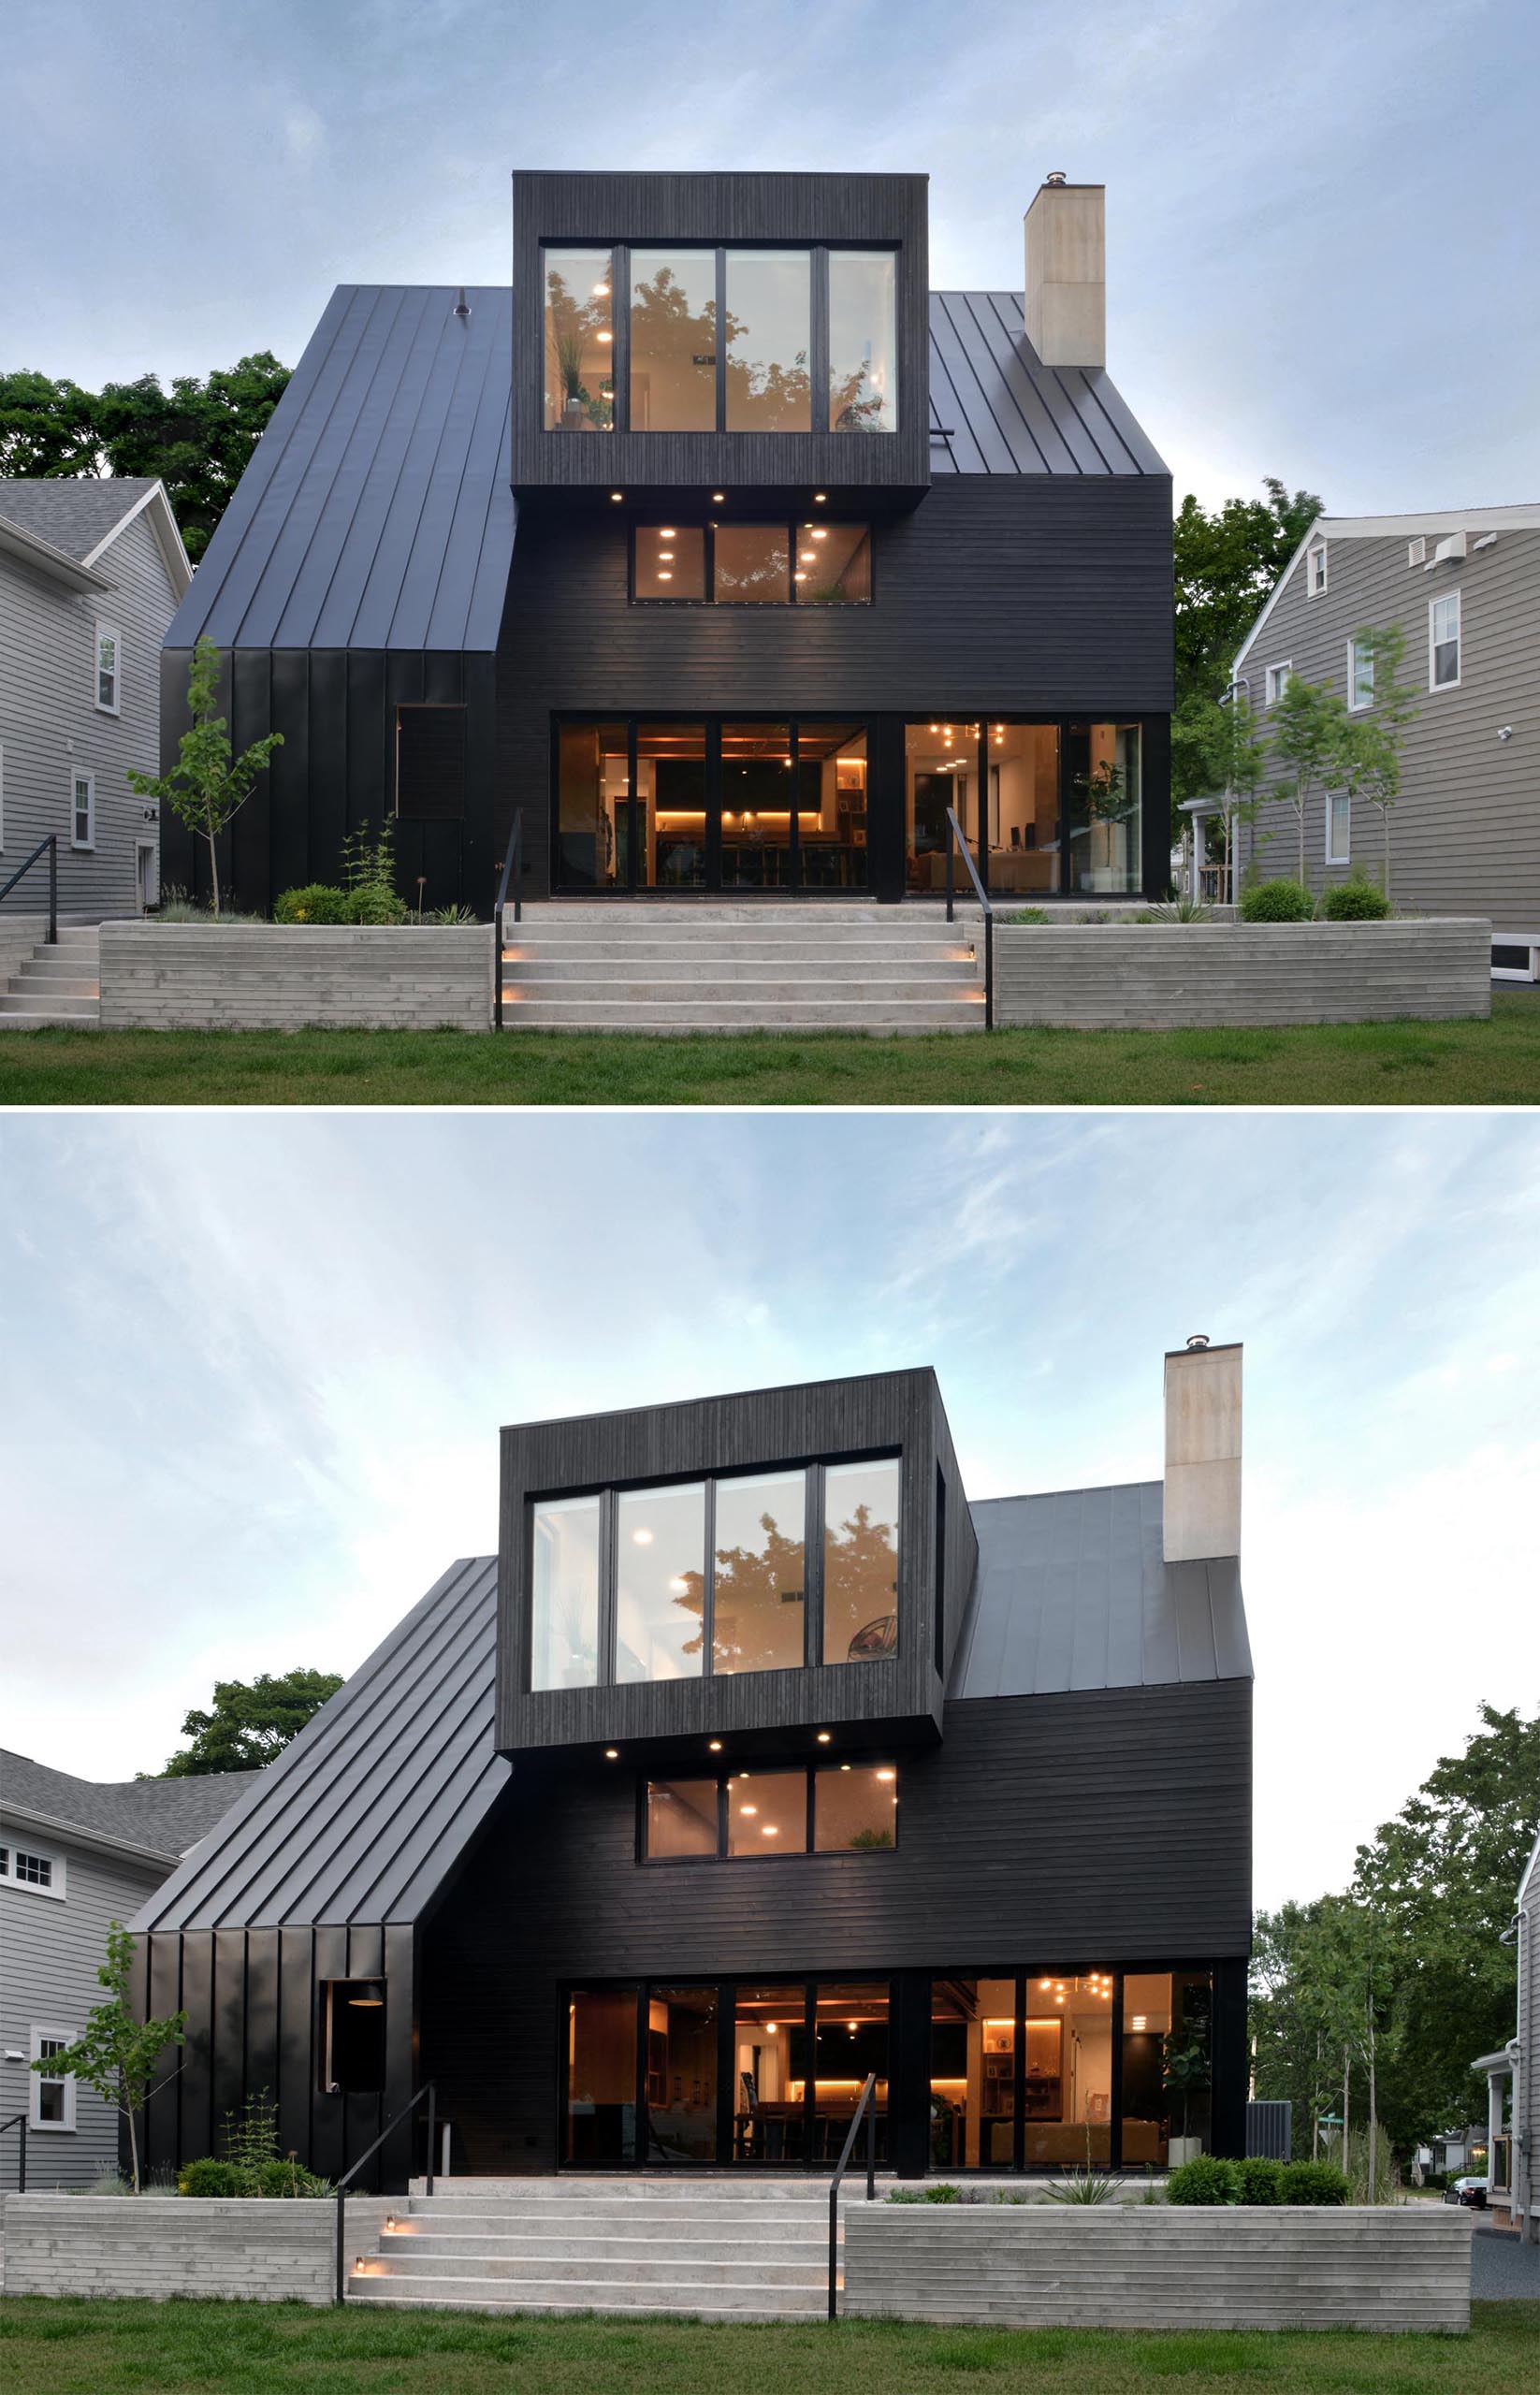 A modern black house with wood siding and a standing seam metal roof, as well as black window frames.